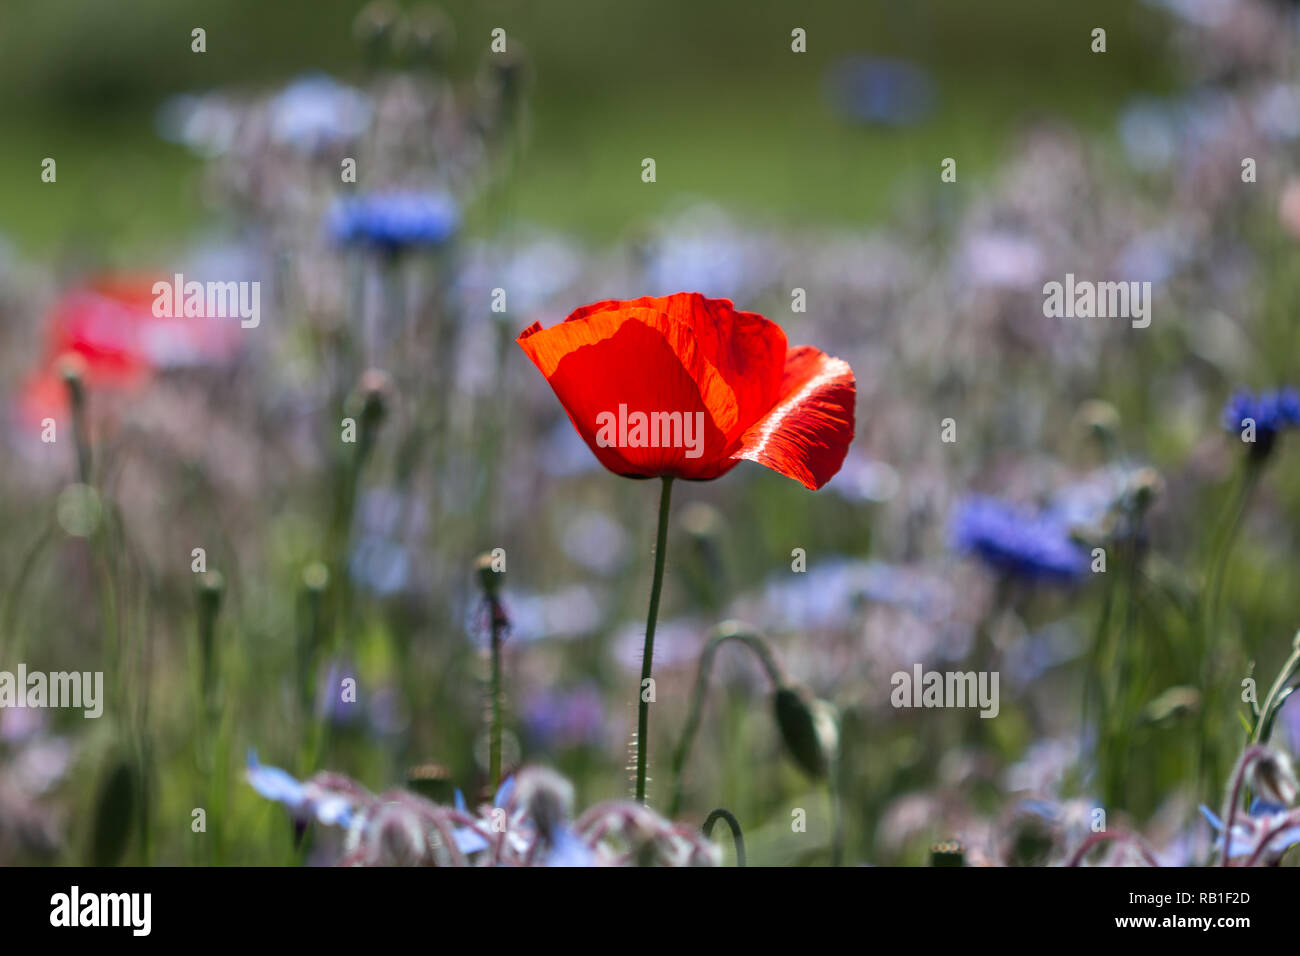 Single poppy in focus in front of a meadow full of flowers Stock Photo